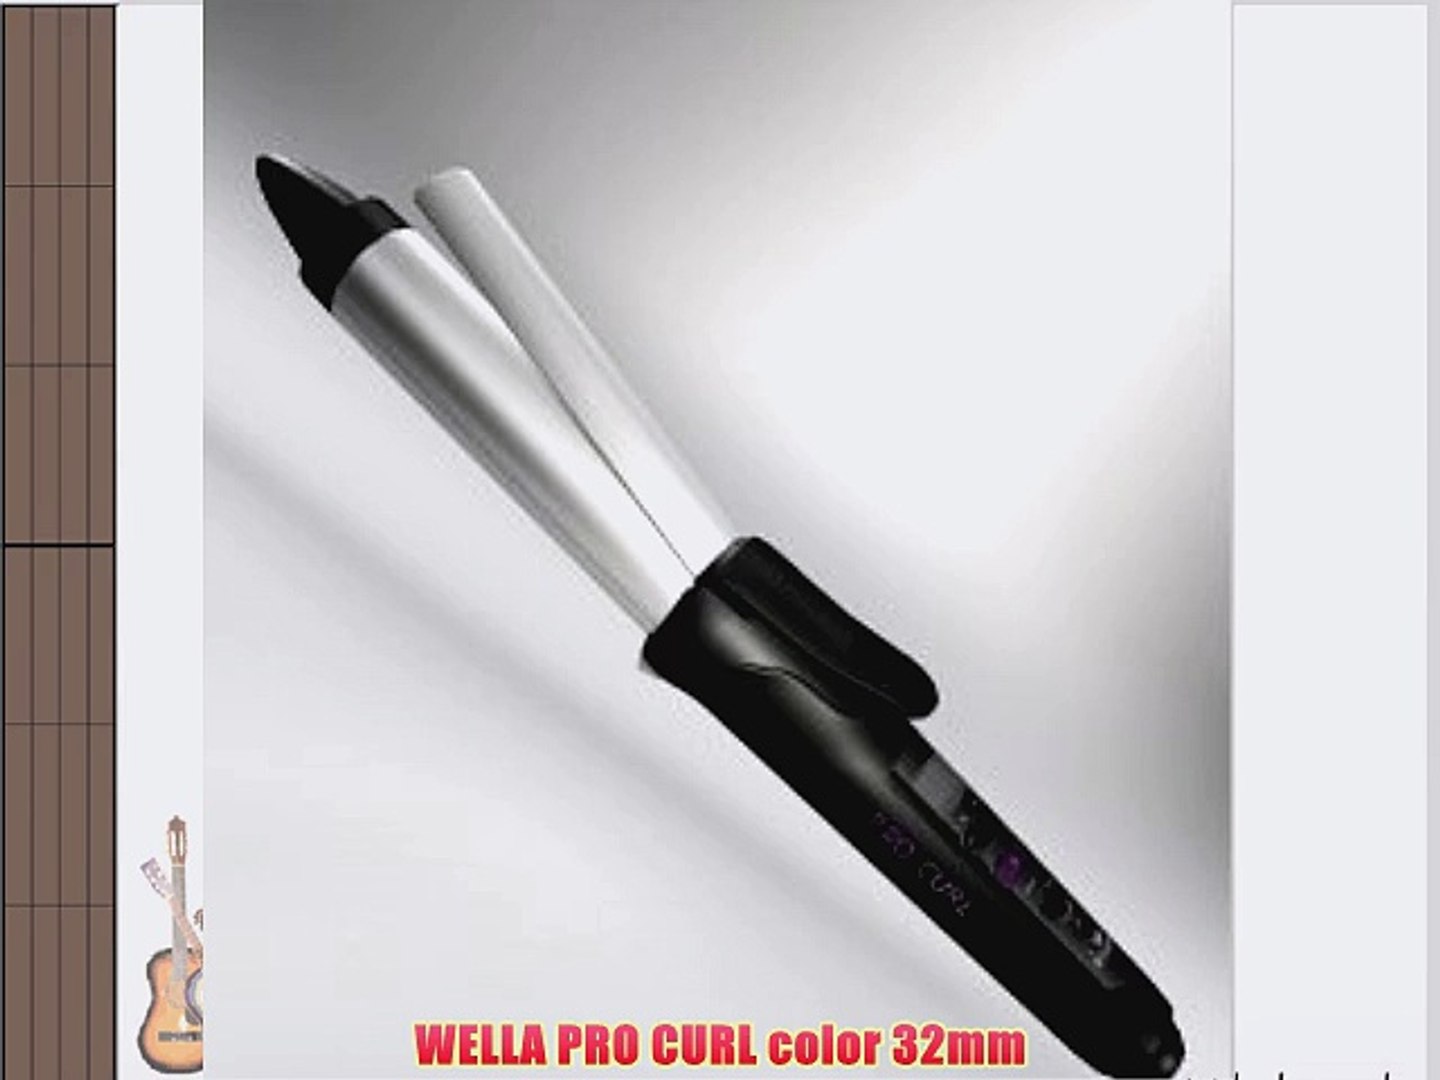 WELLA PRO CURL color 32mm - video Dailymotion